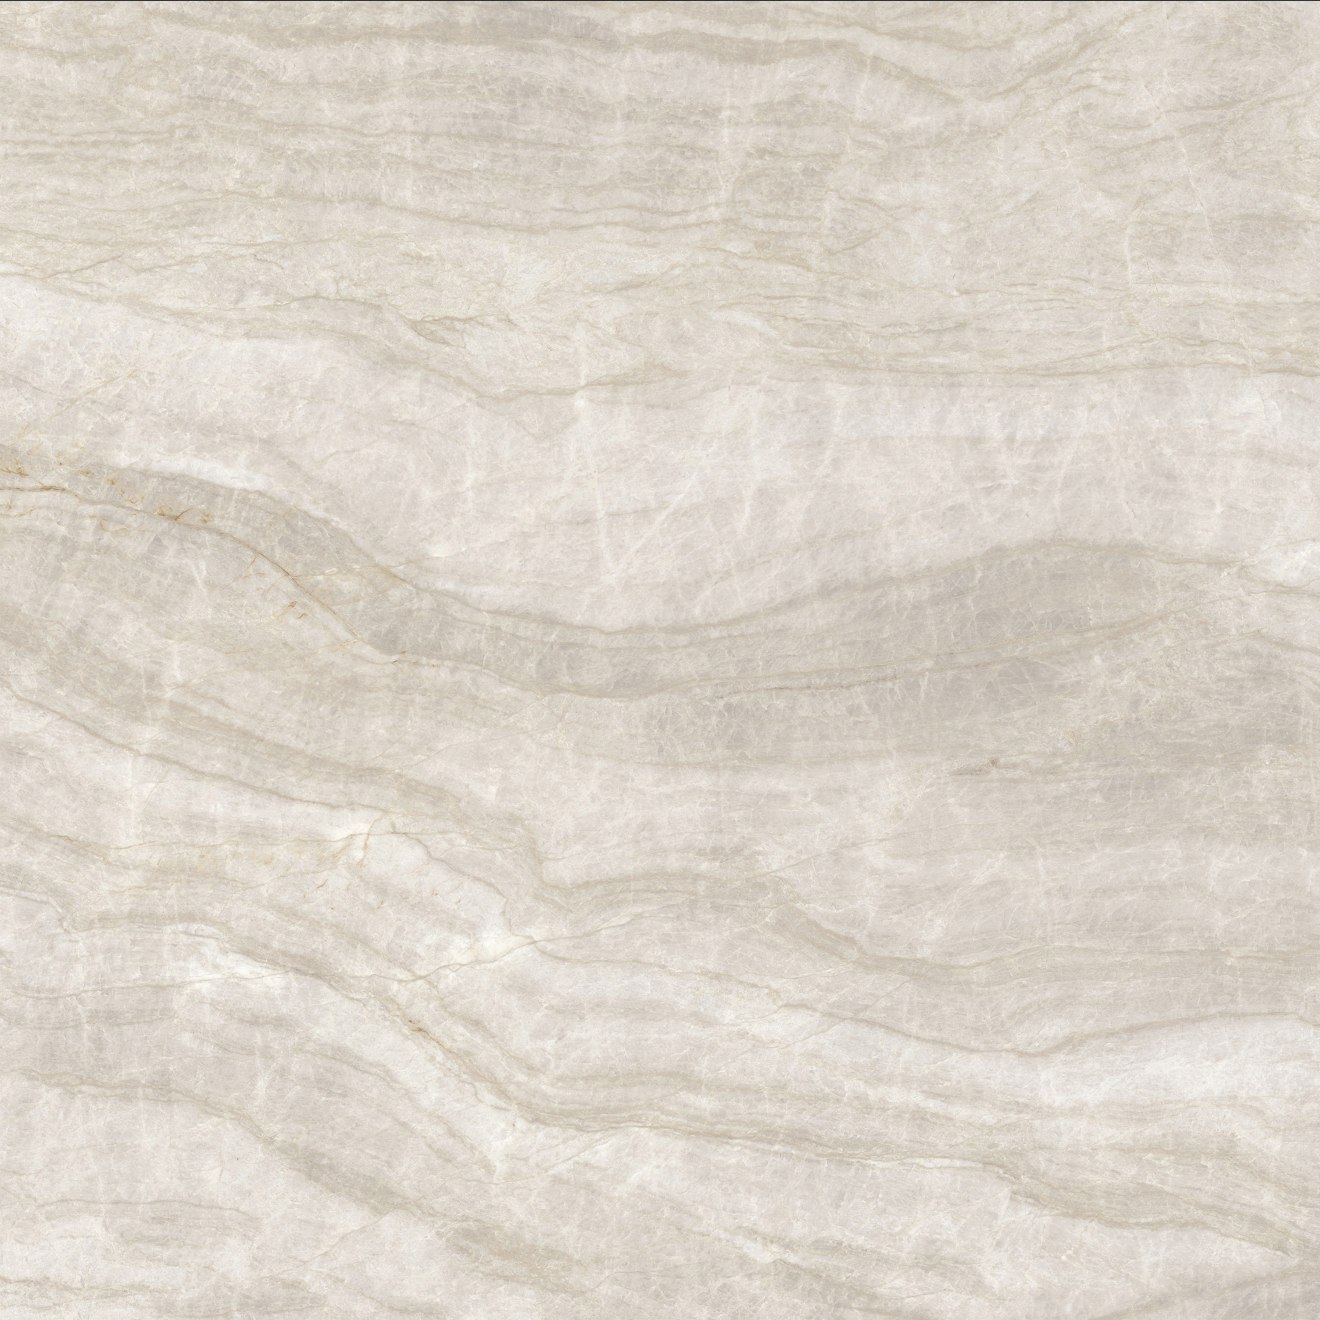 Magnifica The Thirties 30" x 30" - 8mm Polished Porcelain Tile in Taj Mahal | Bedrosians Tile and Stone